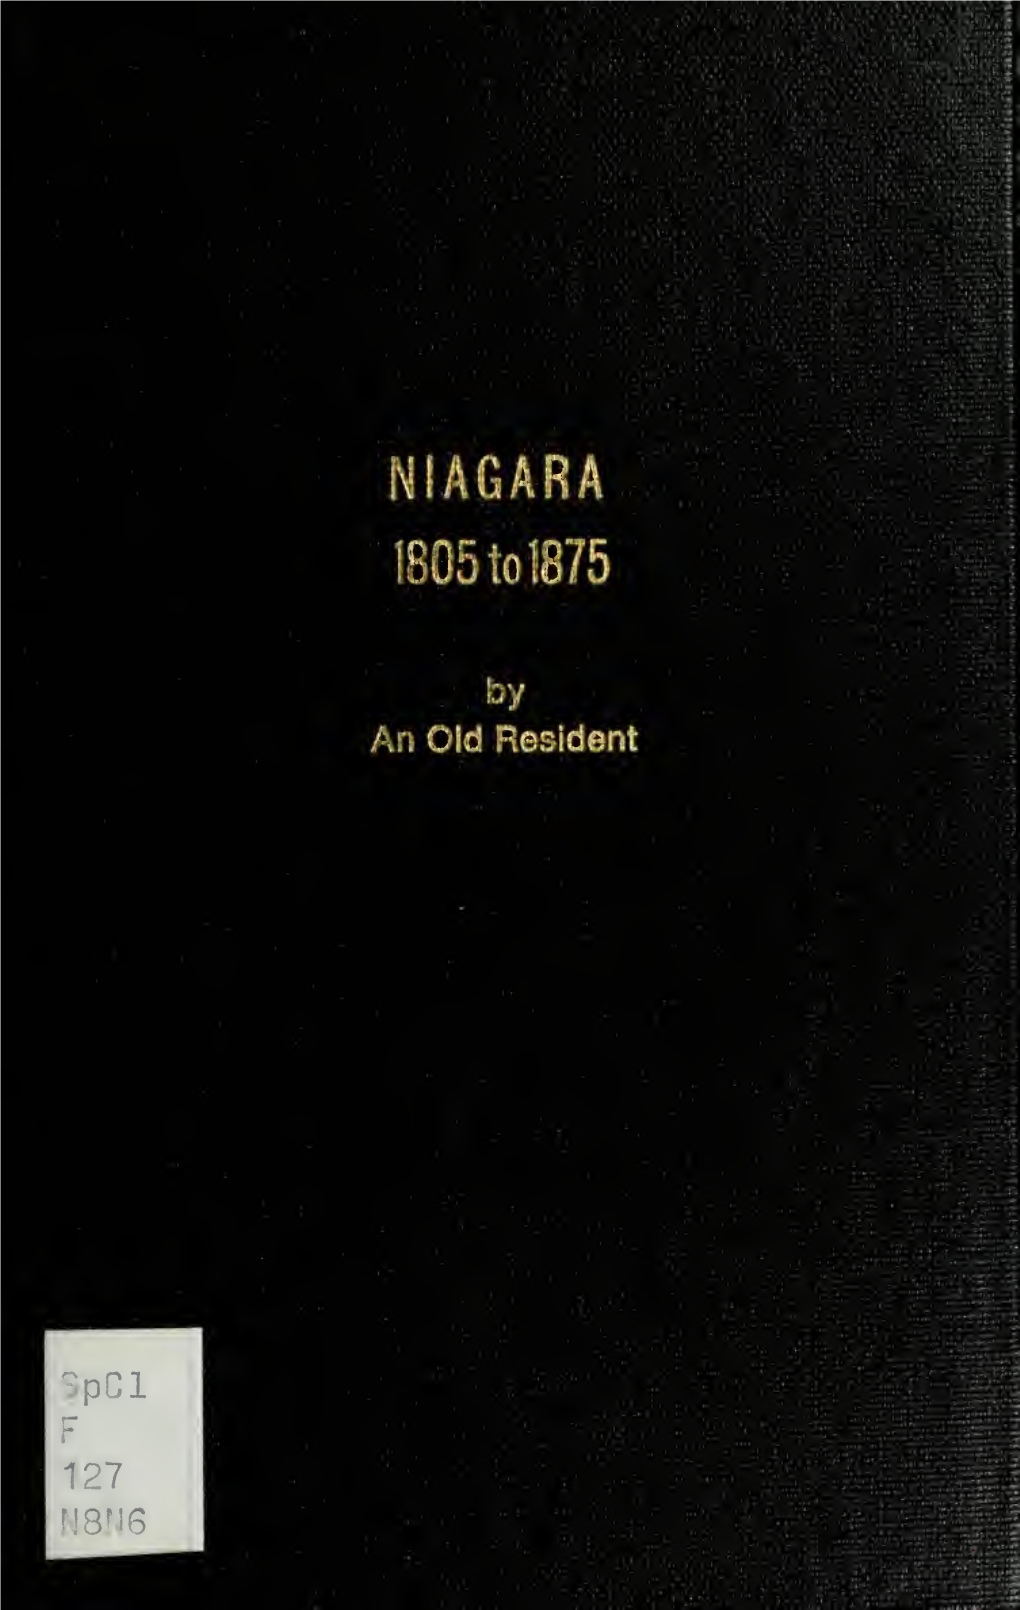 Niagara, from 1805 to 1875, by an Old Resident.